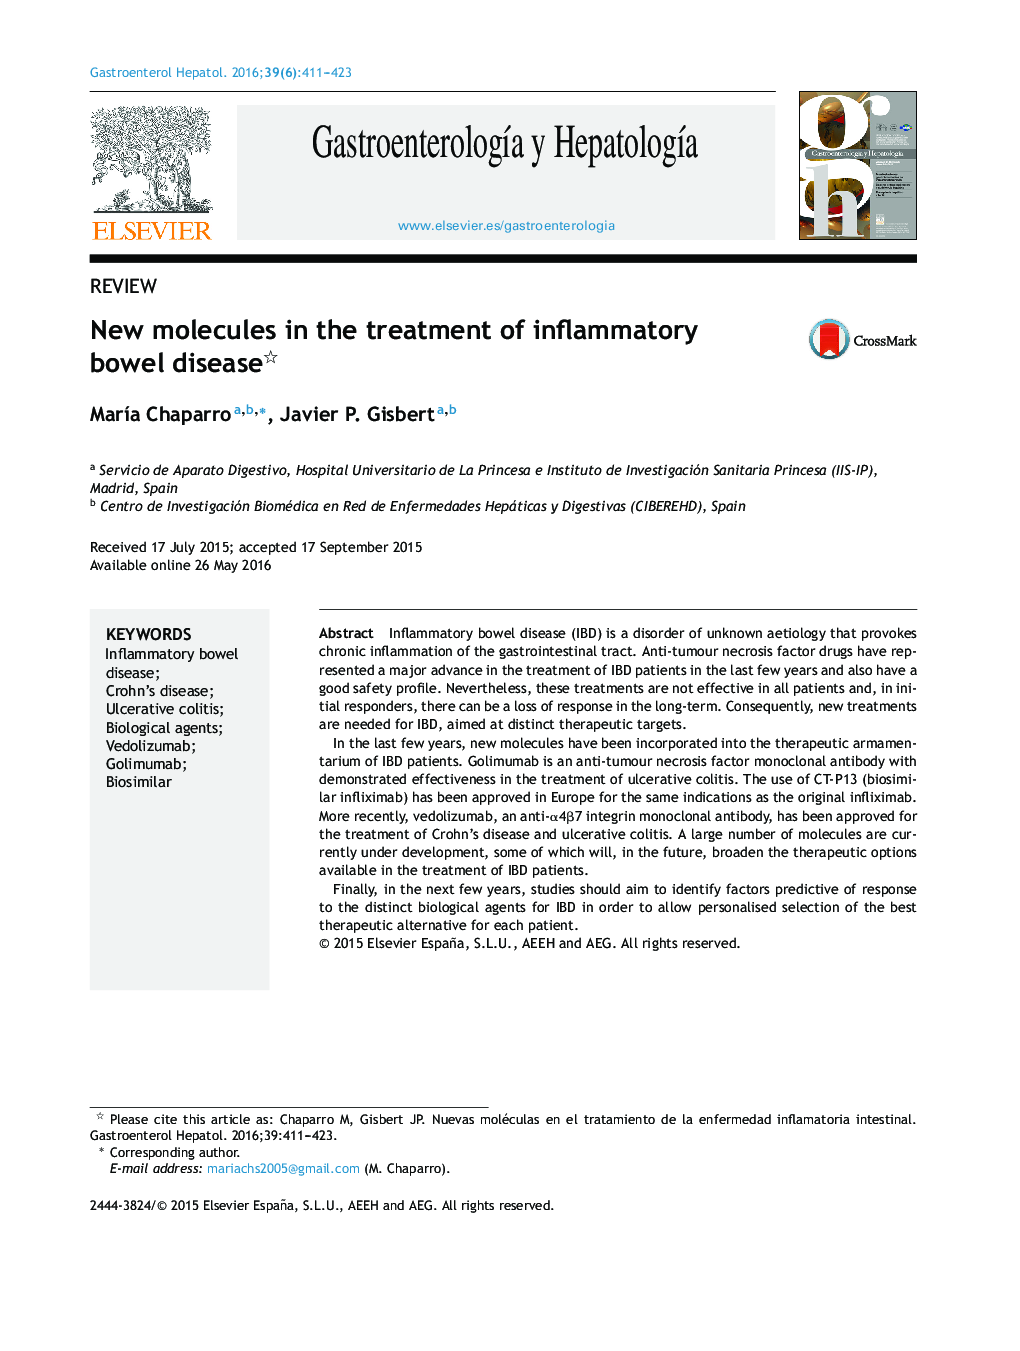 New molecules in the treatment of inflammatory bowel disease 